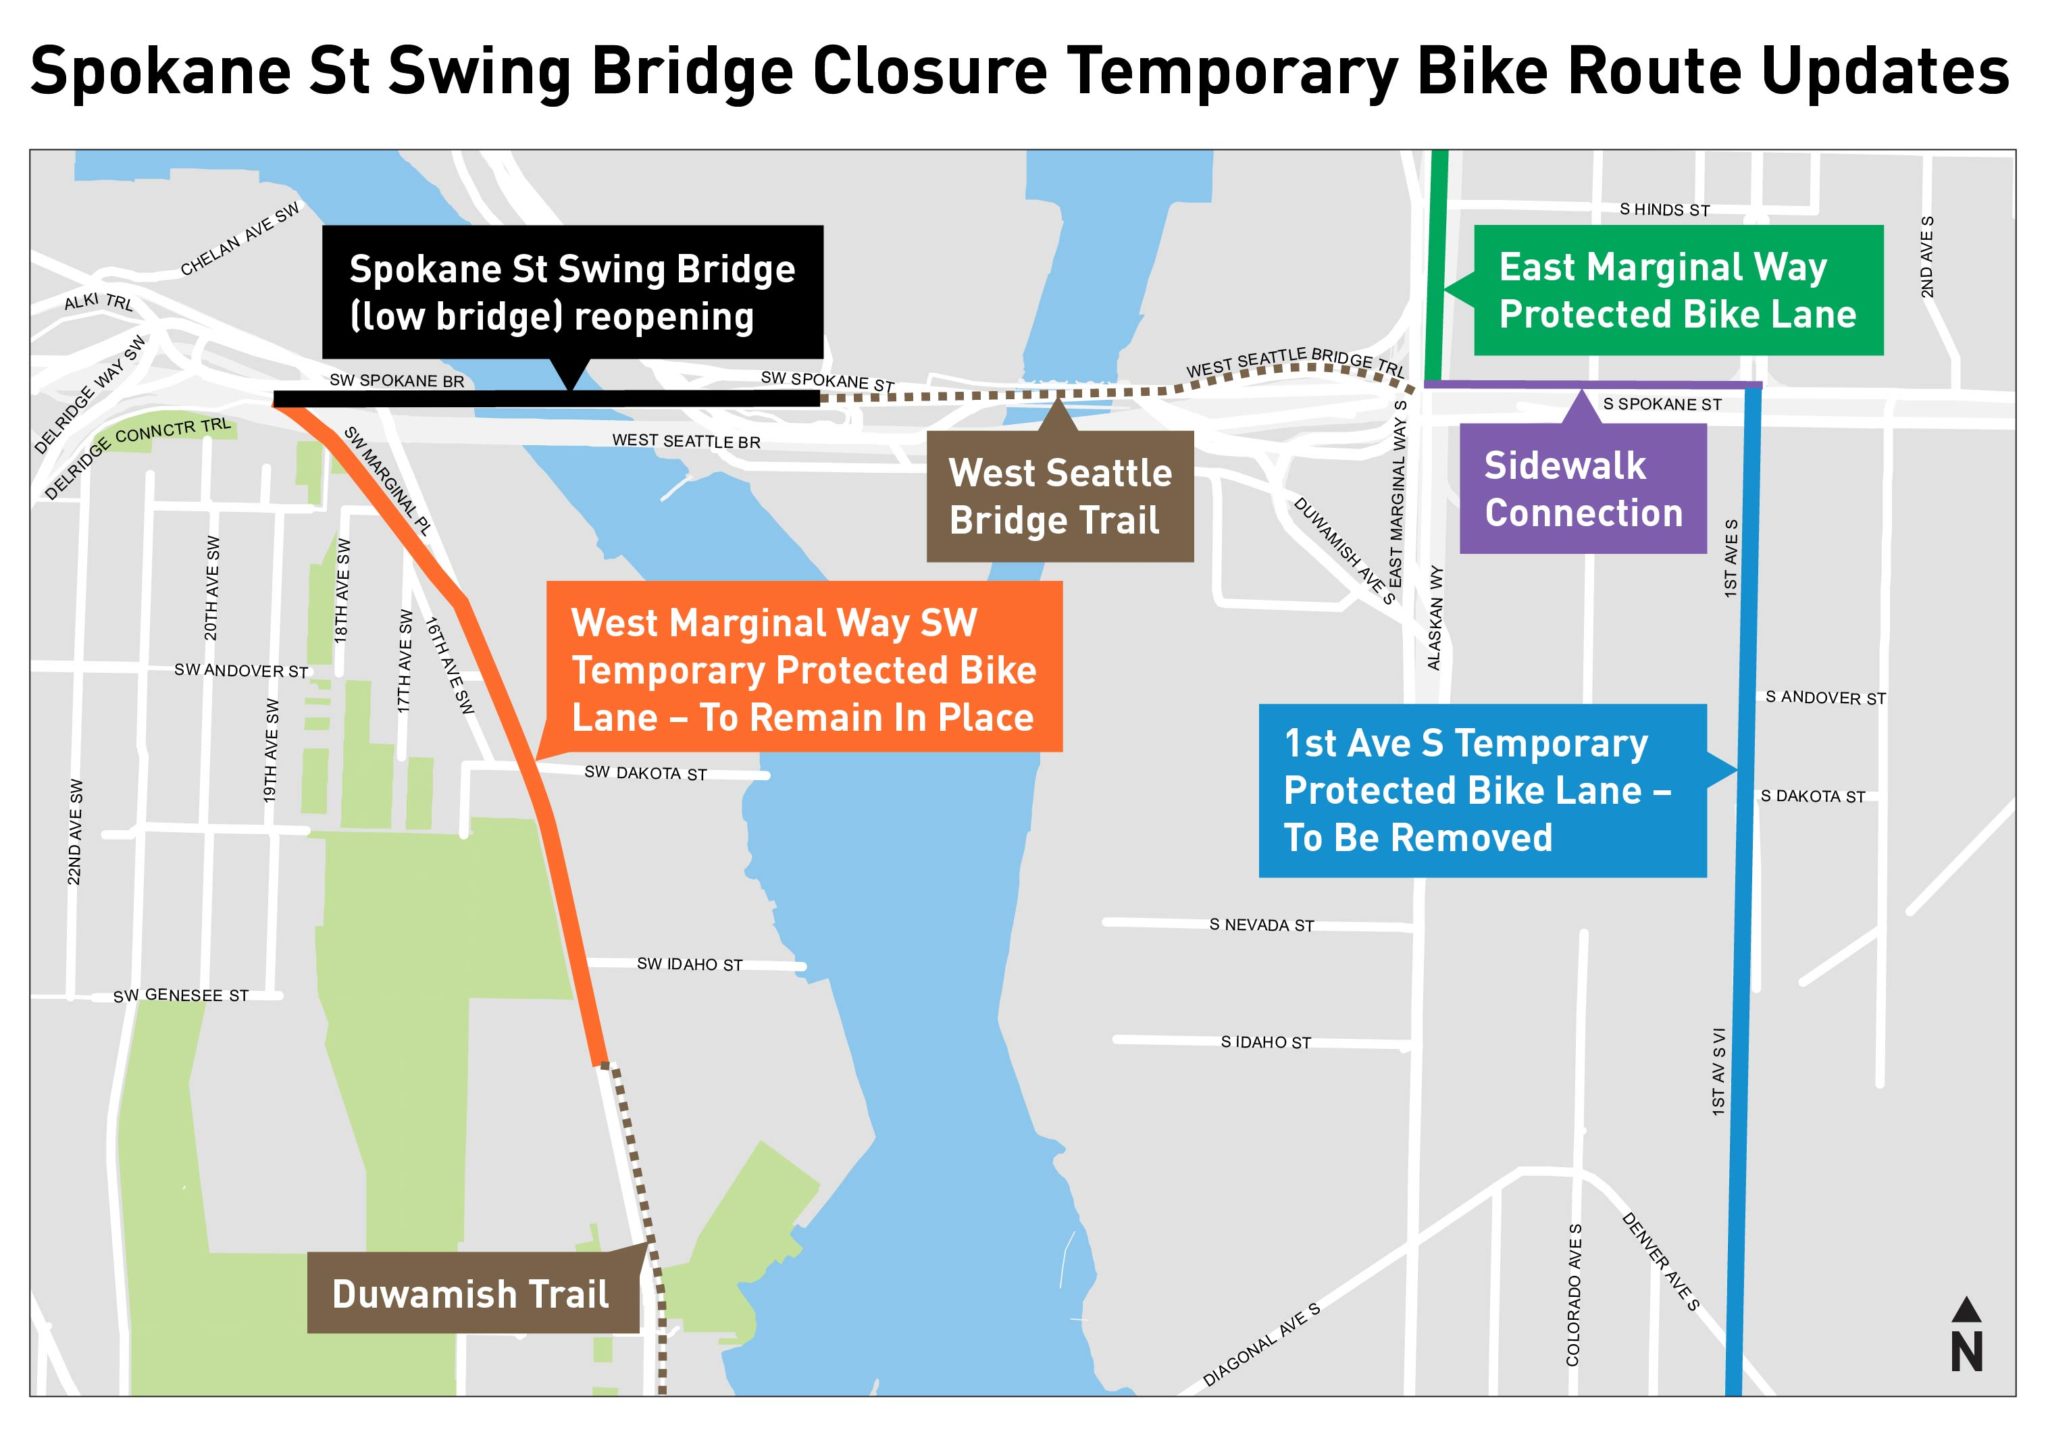 Map of updates to the bike detour route, including removing the temporary 1st Ave S detour route, and keeping the West Marginal Way SW temporary protected bike lane in its current location. The Spokane St Swing bridge reopening is shown in the upper left corner with a black line and text box.